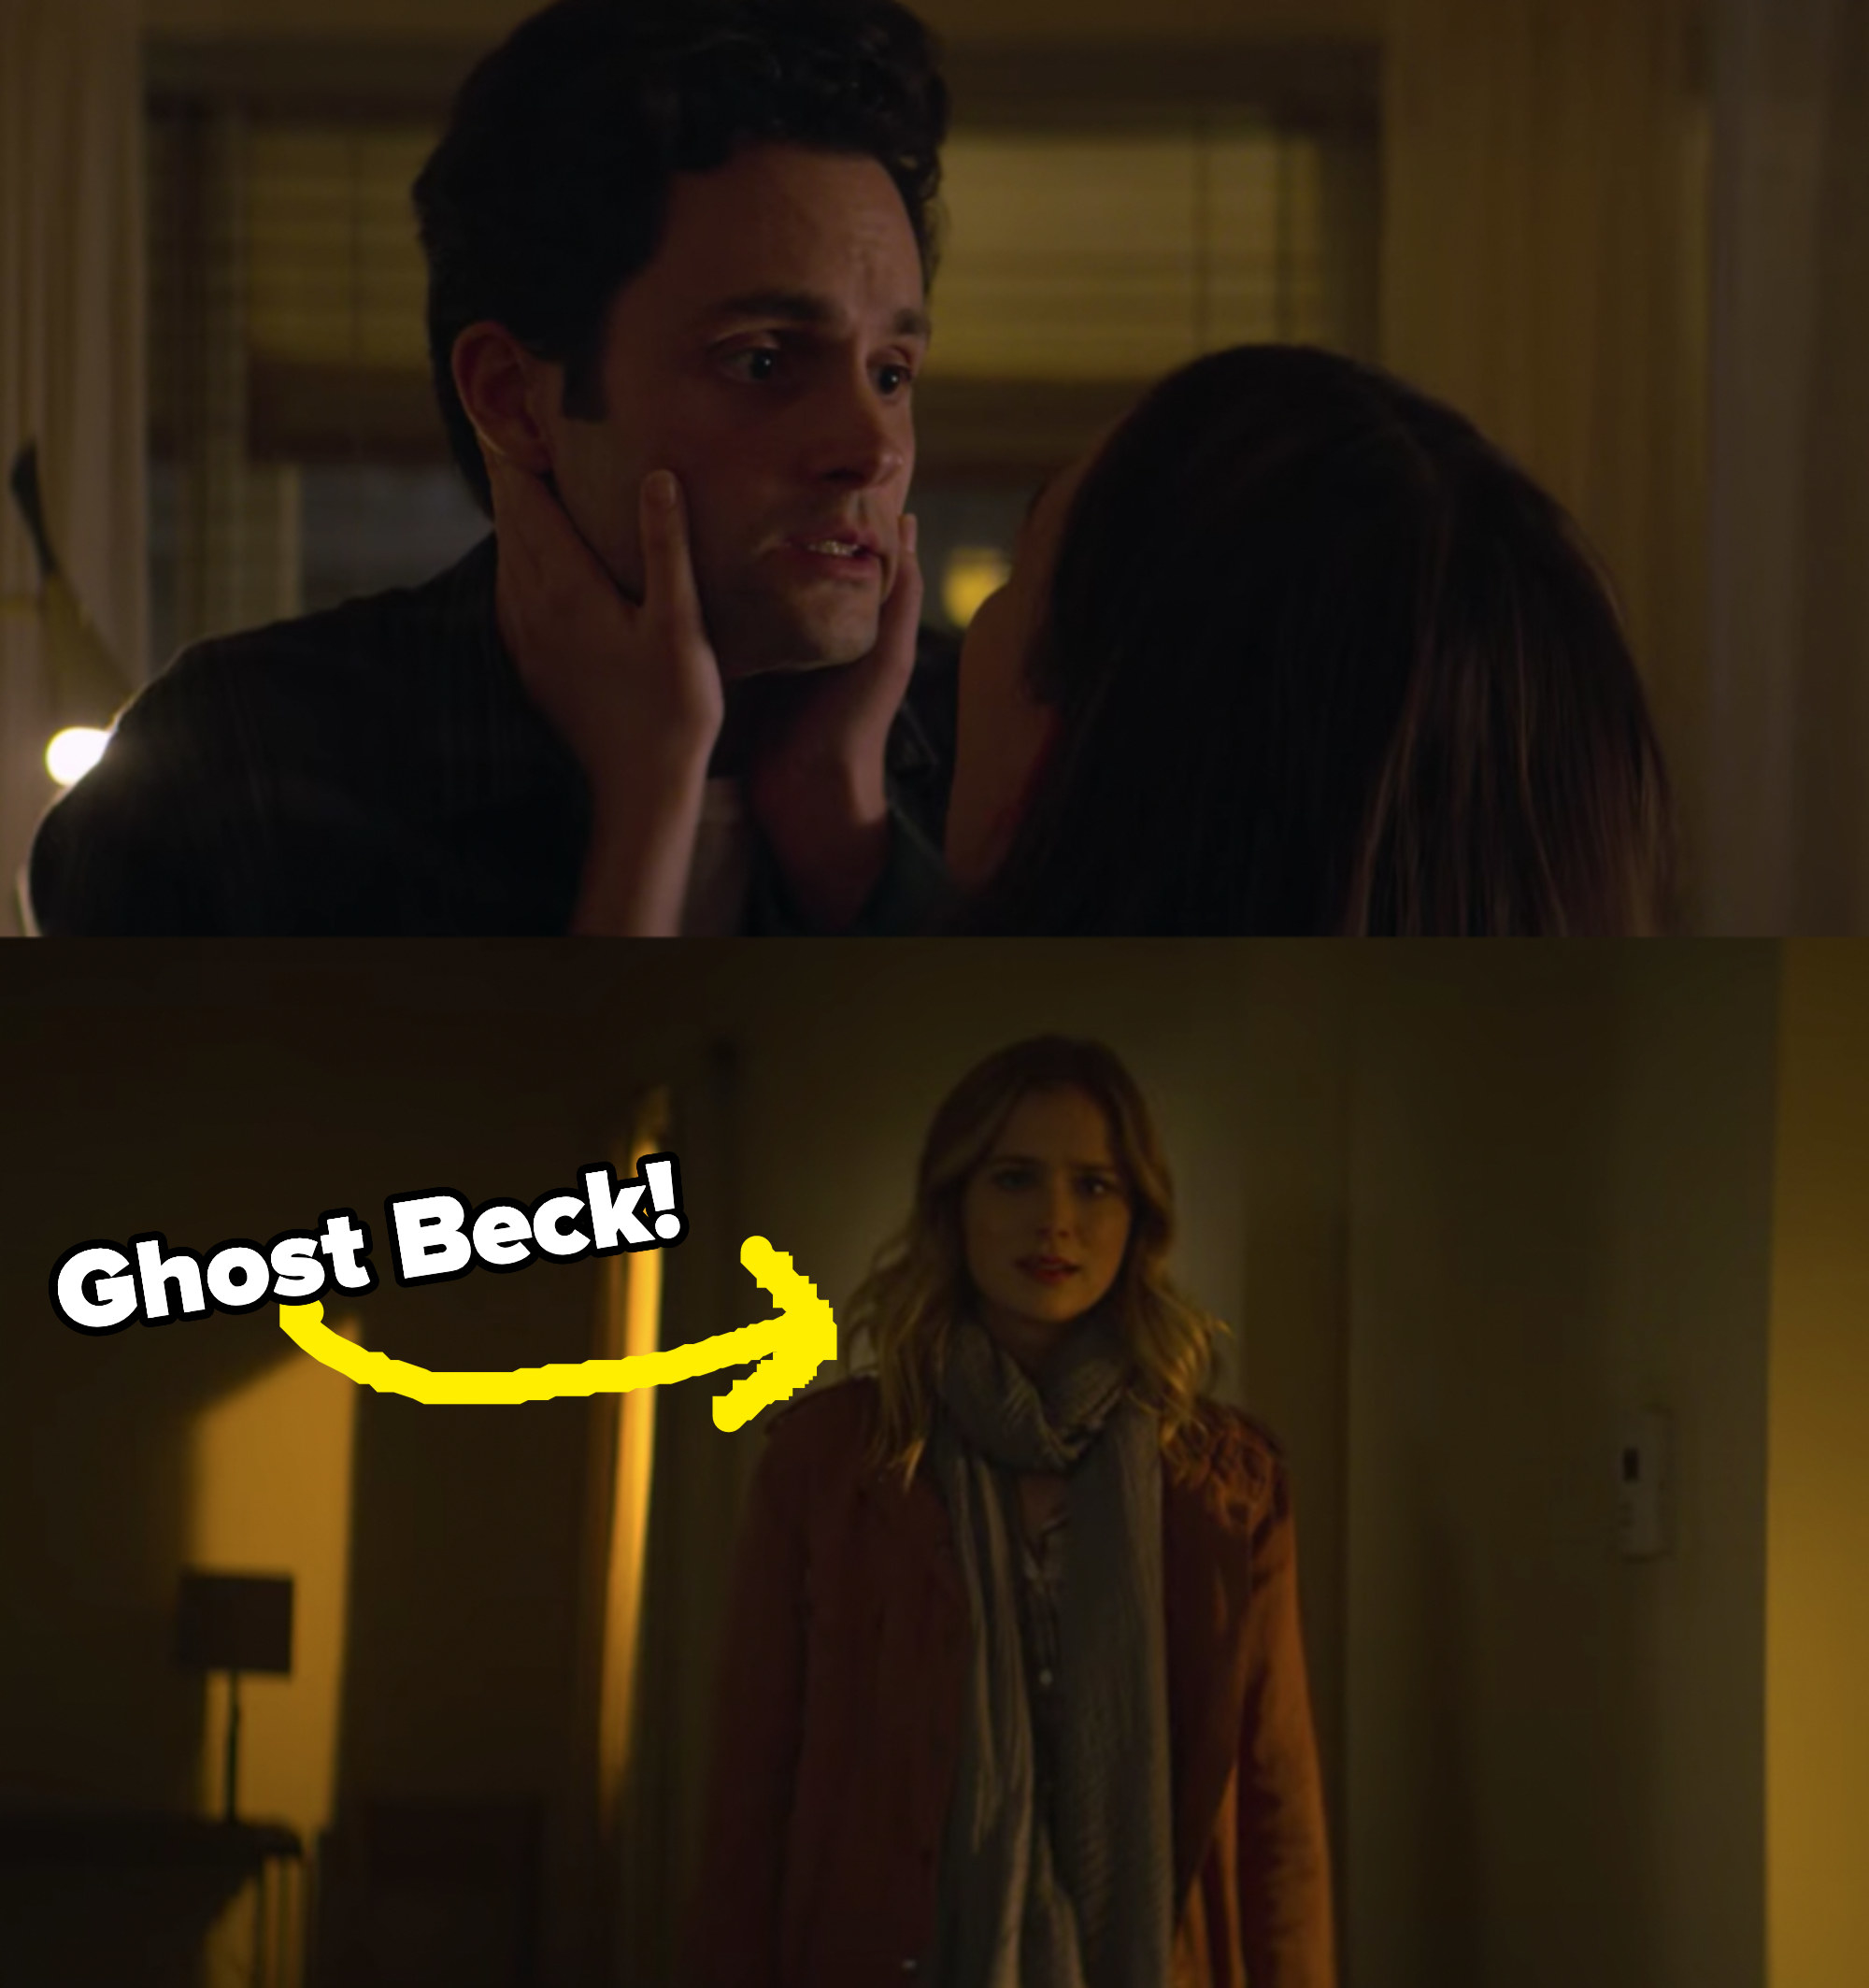 Love holds Joe&#x27;s face as he looks off to the side to see a version of ghost Beck standing in the corner